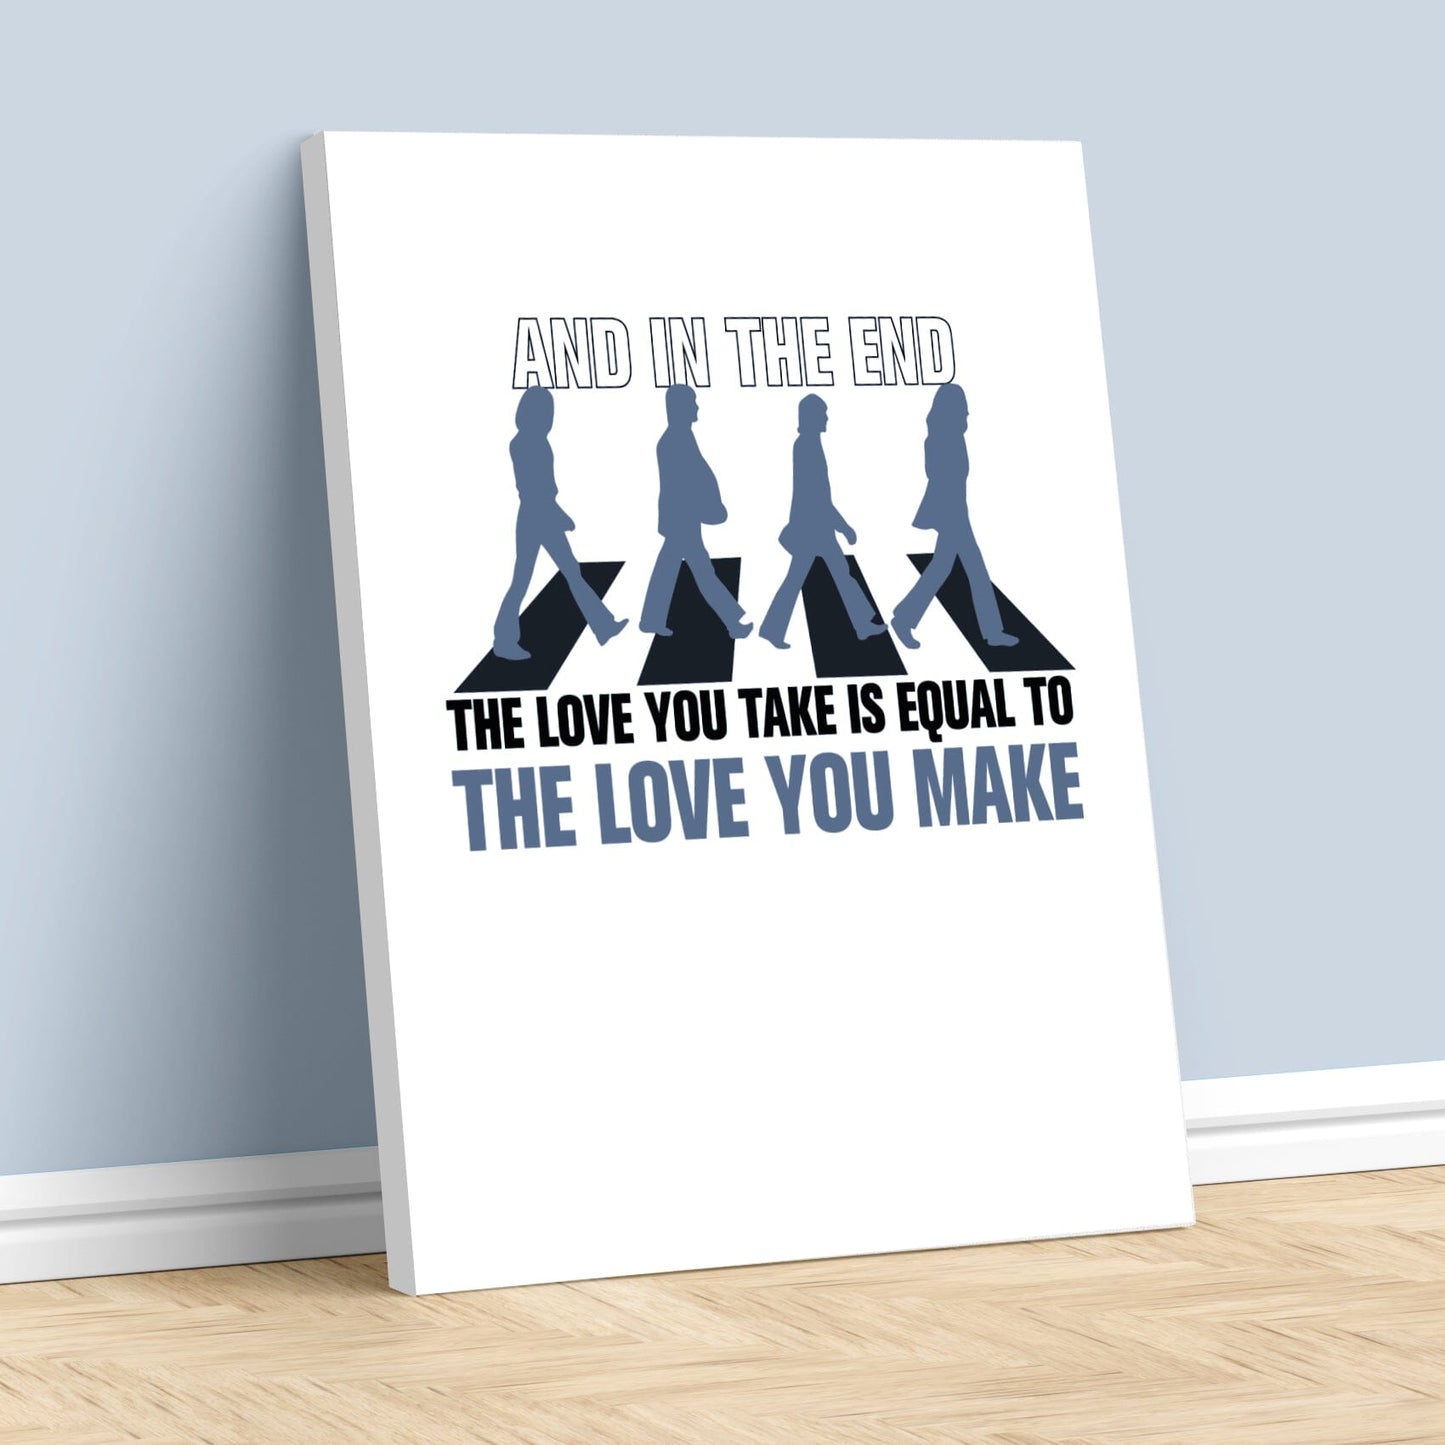 The End by the Beatles - Song Lyric Music Poster Art Print Song Lyrics Art Song Lyrics Art 11x14 Canvas Wrap 